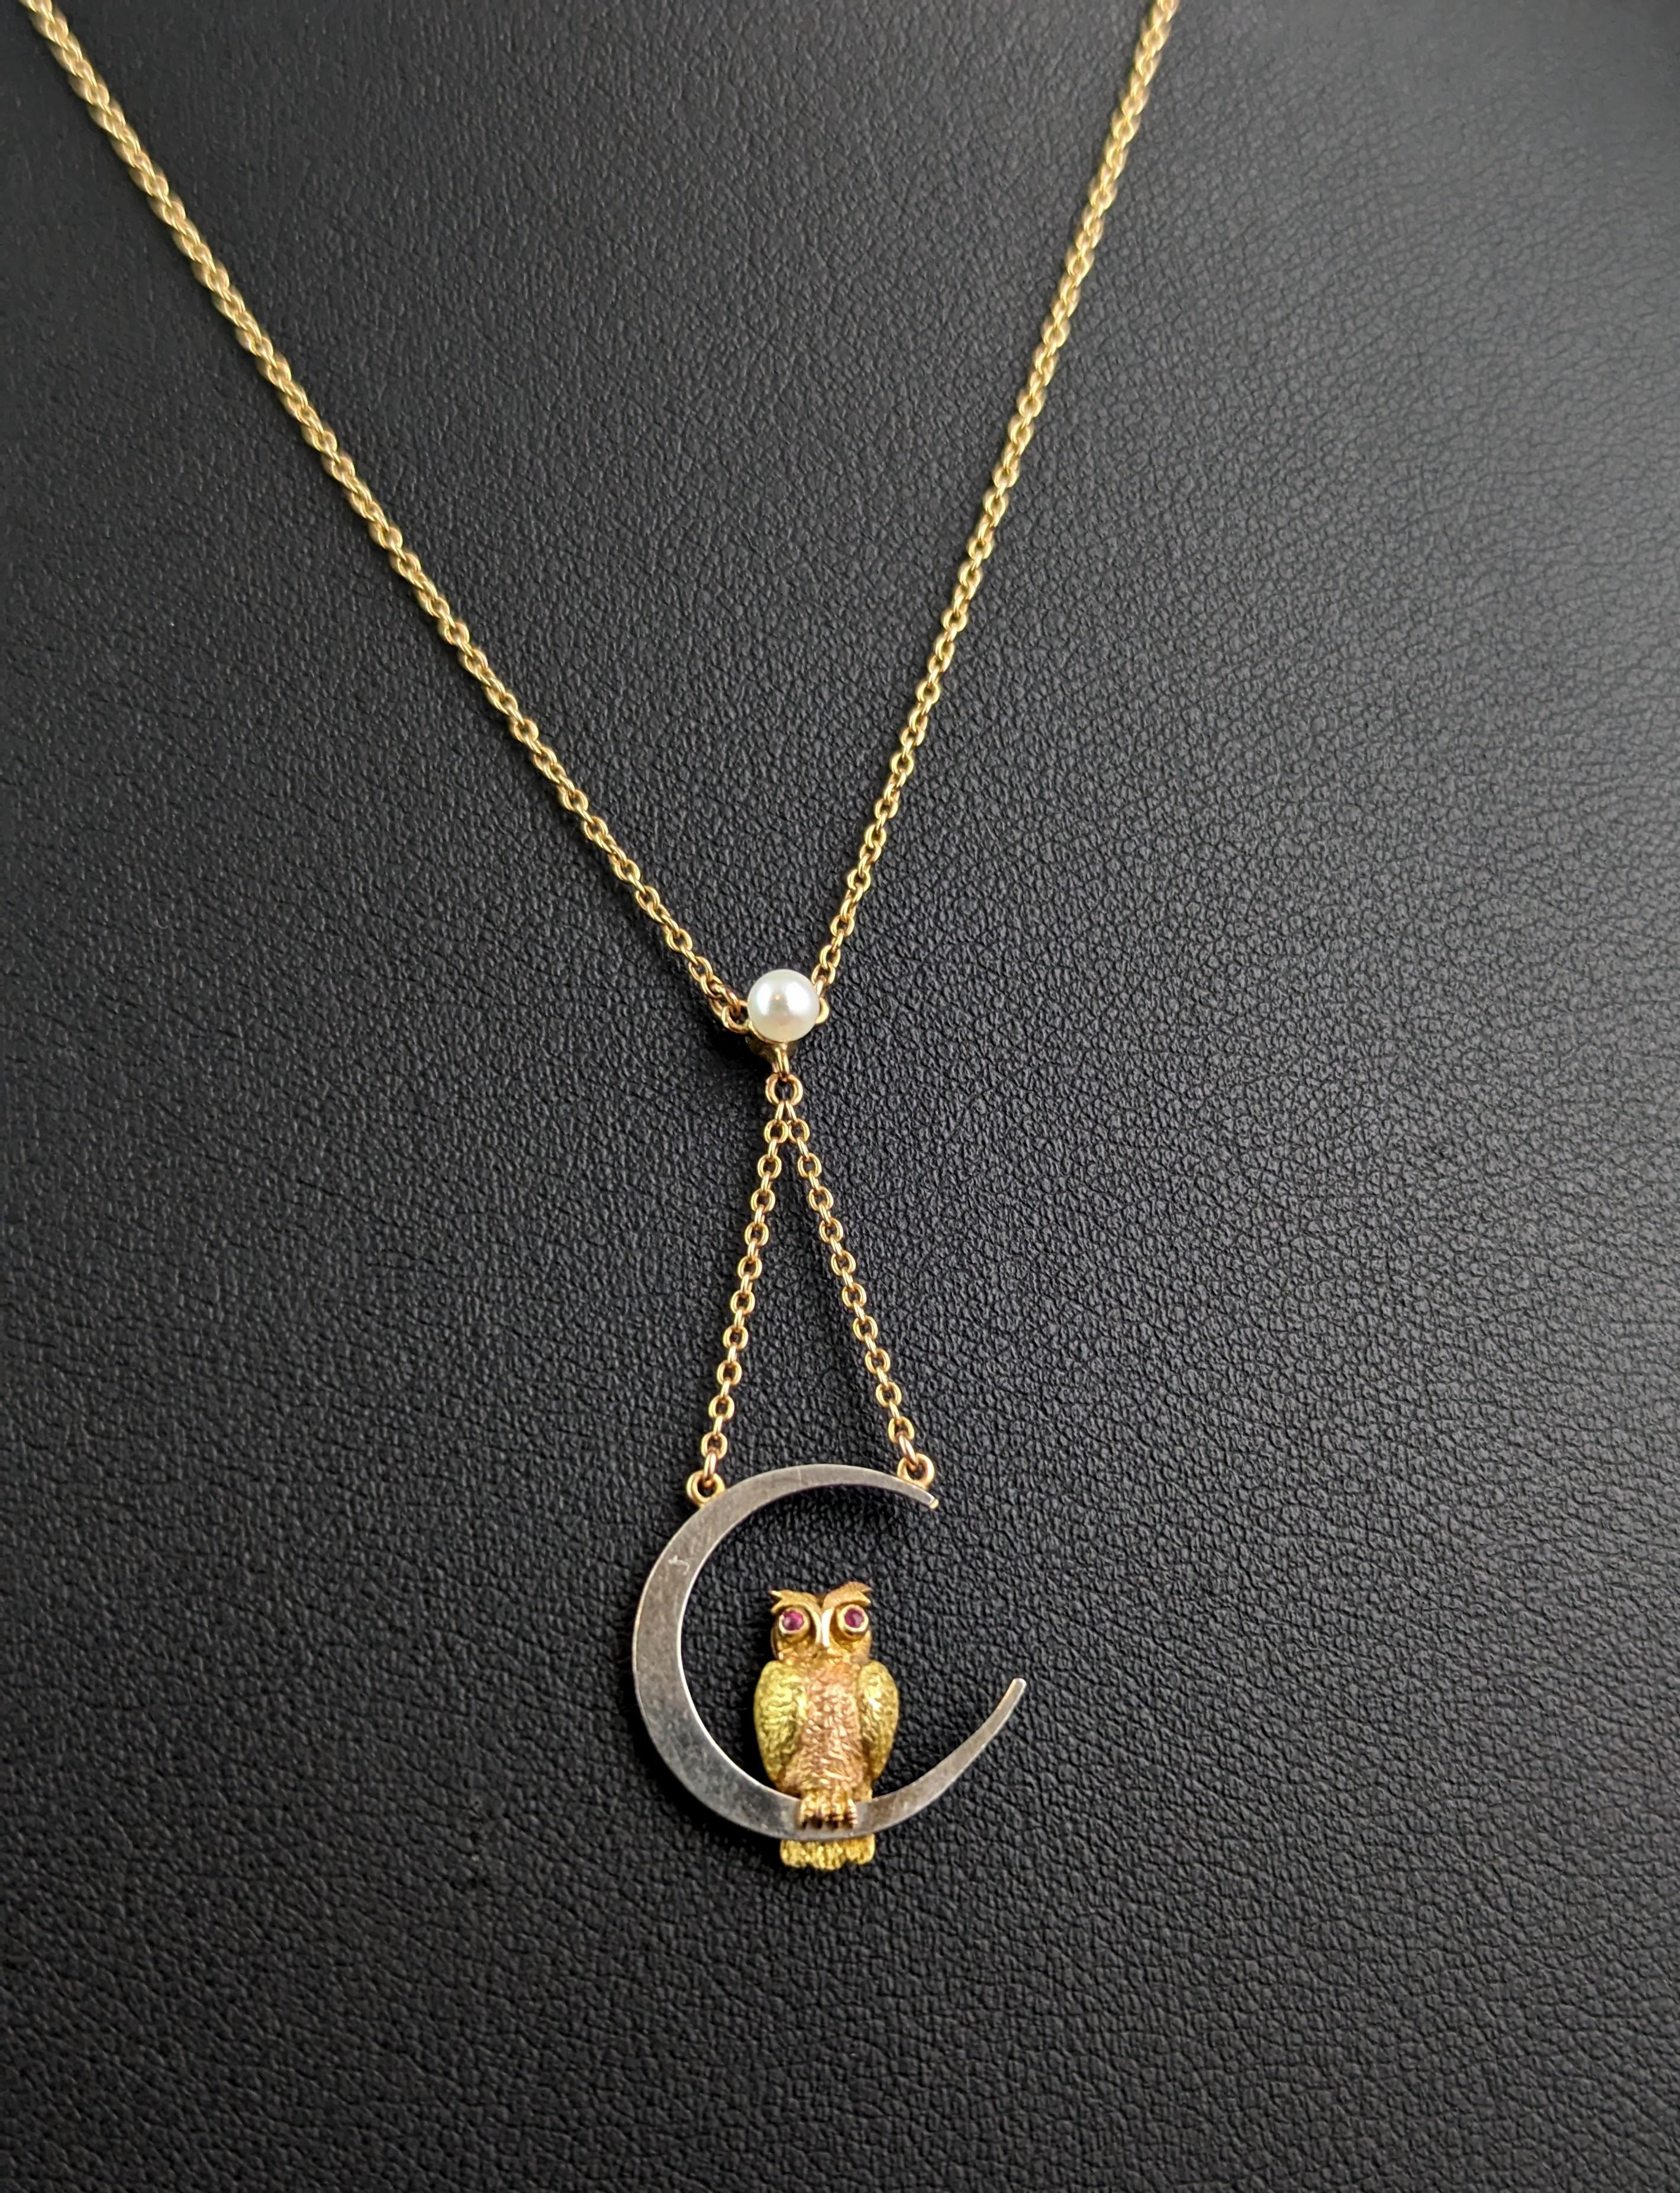 Antique Owl and Crescent moon pendant necklace, 15k gold and platinum, Ruby For Sale 8